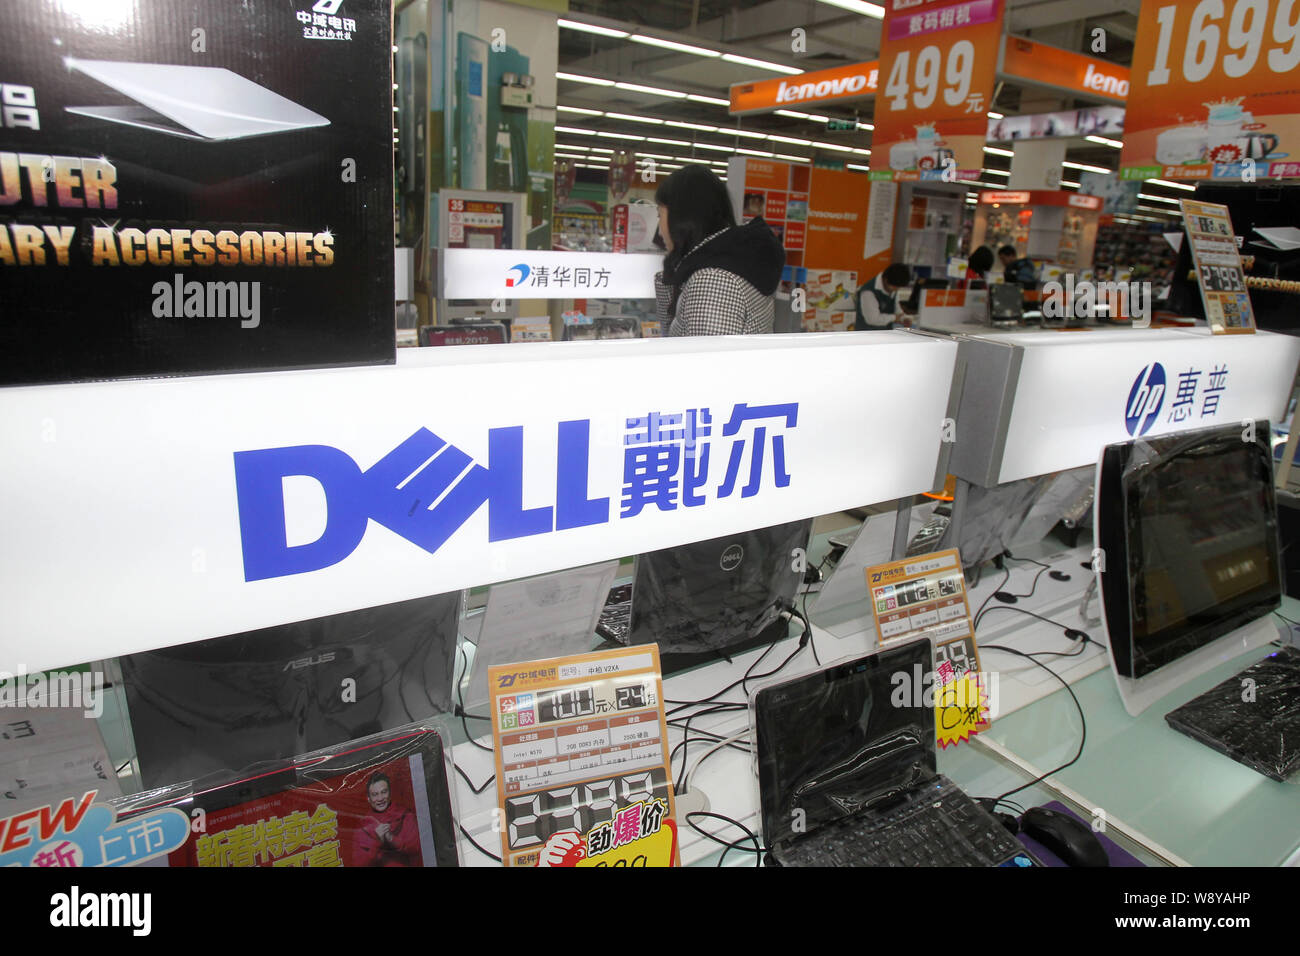 Computers for Sale in a Computer Store Editorial Image - Image of